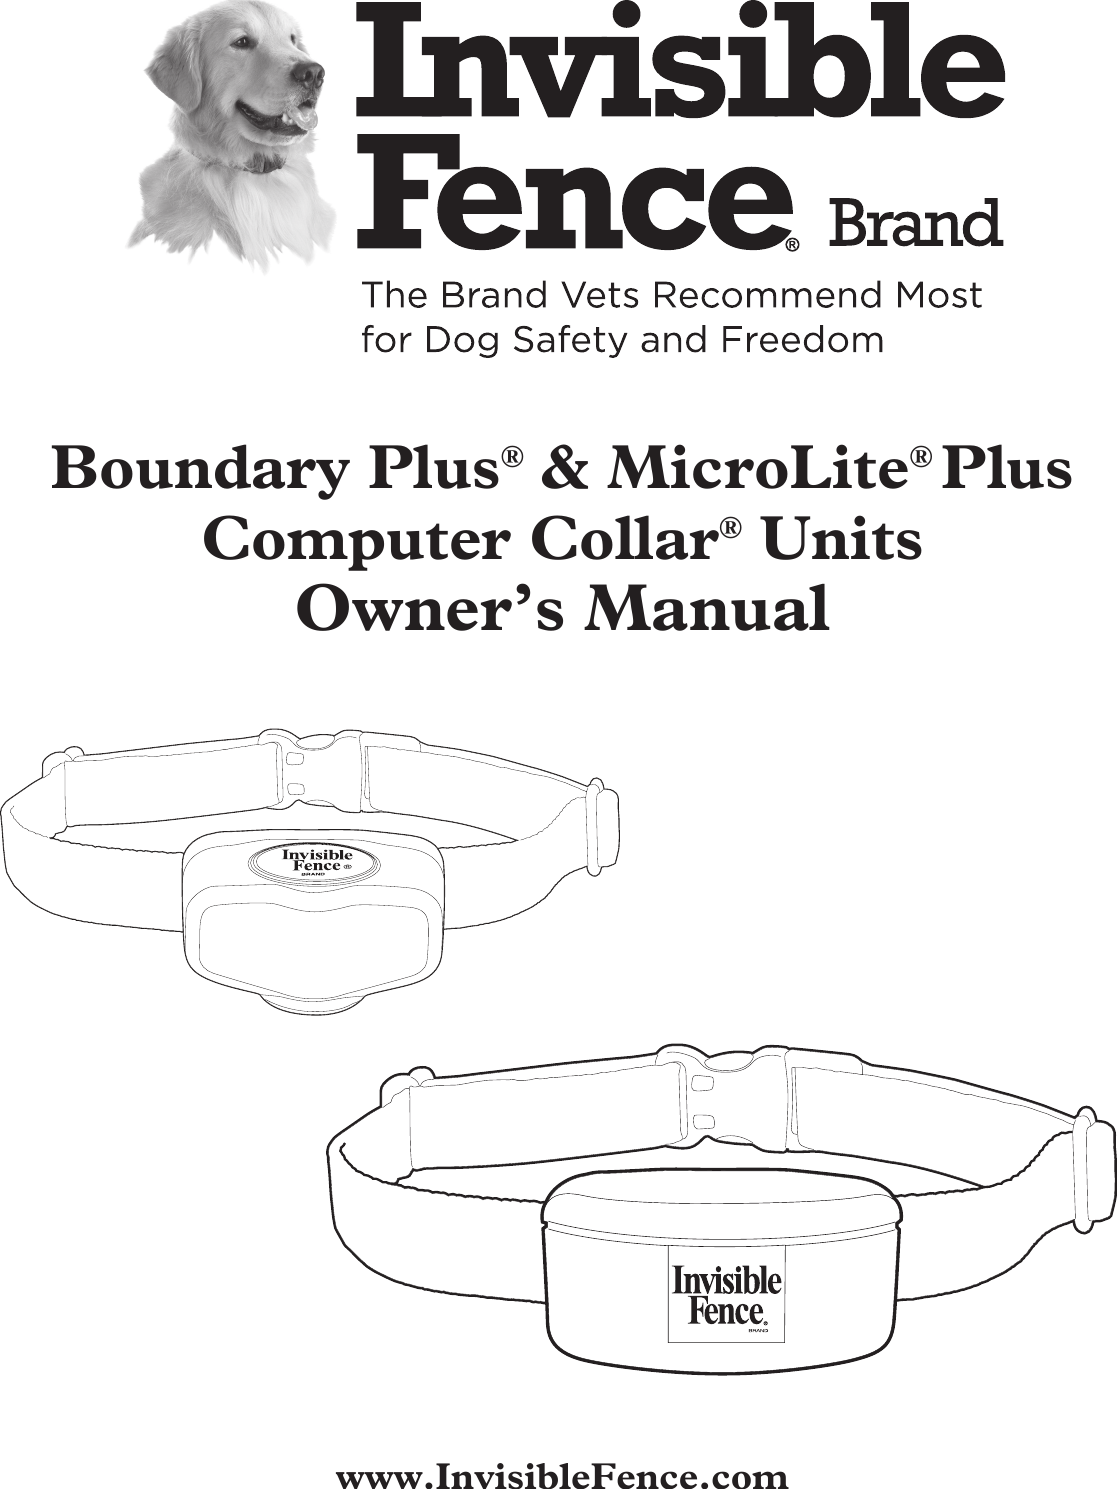 Boundary Plus® &amp; MicroLite® PlusComputer Collar® UnitsOwner’s Manualwww.InvisibleFence.com